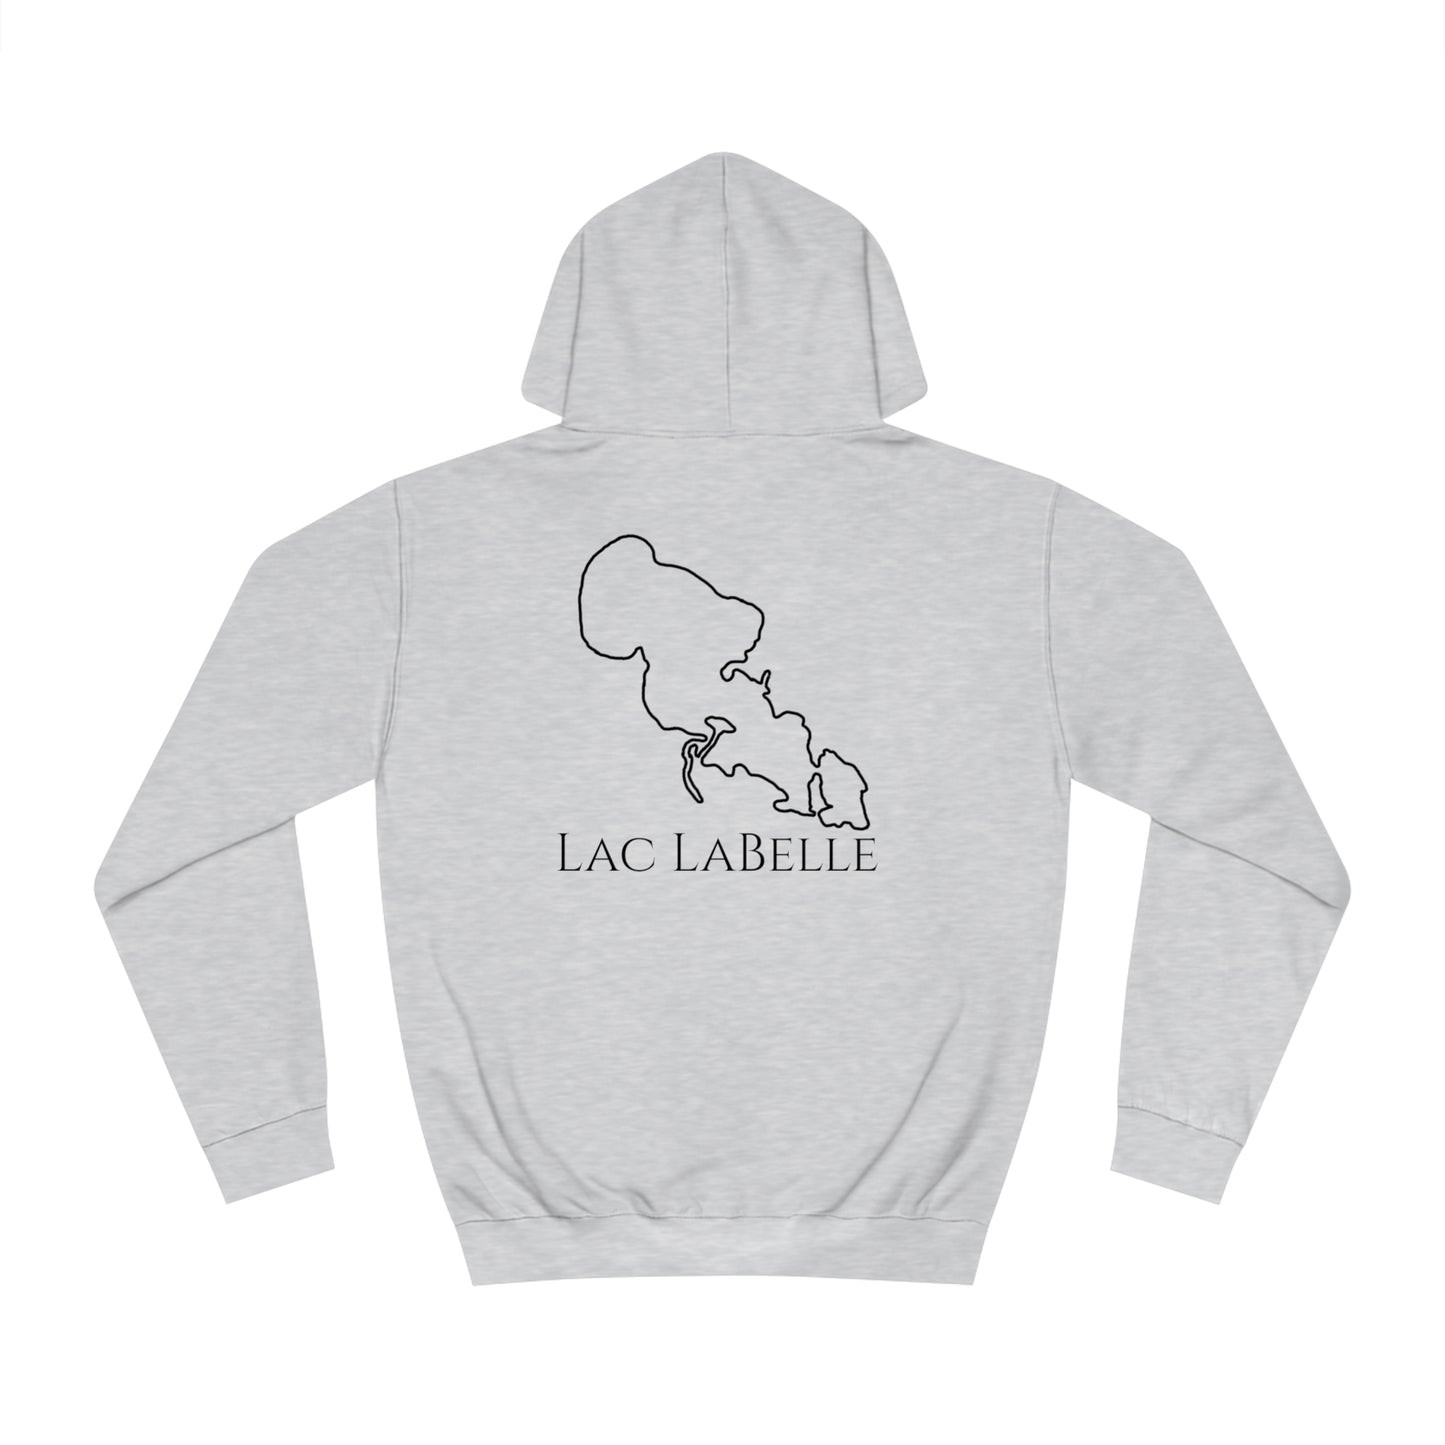 Row Boat Dog Fishing Patch - Lac LaBelle Unisex Hoodie Medium Weight